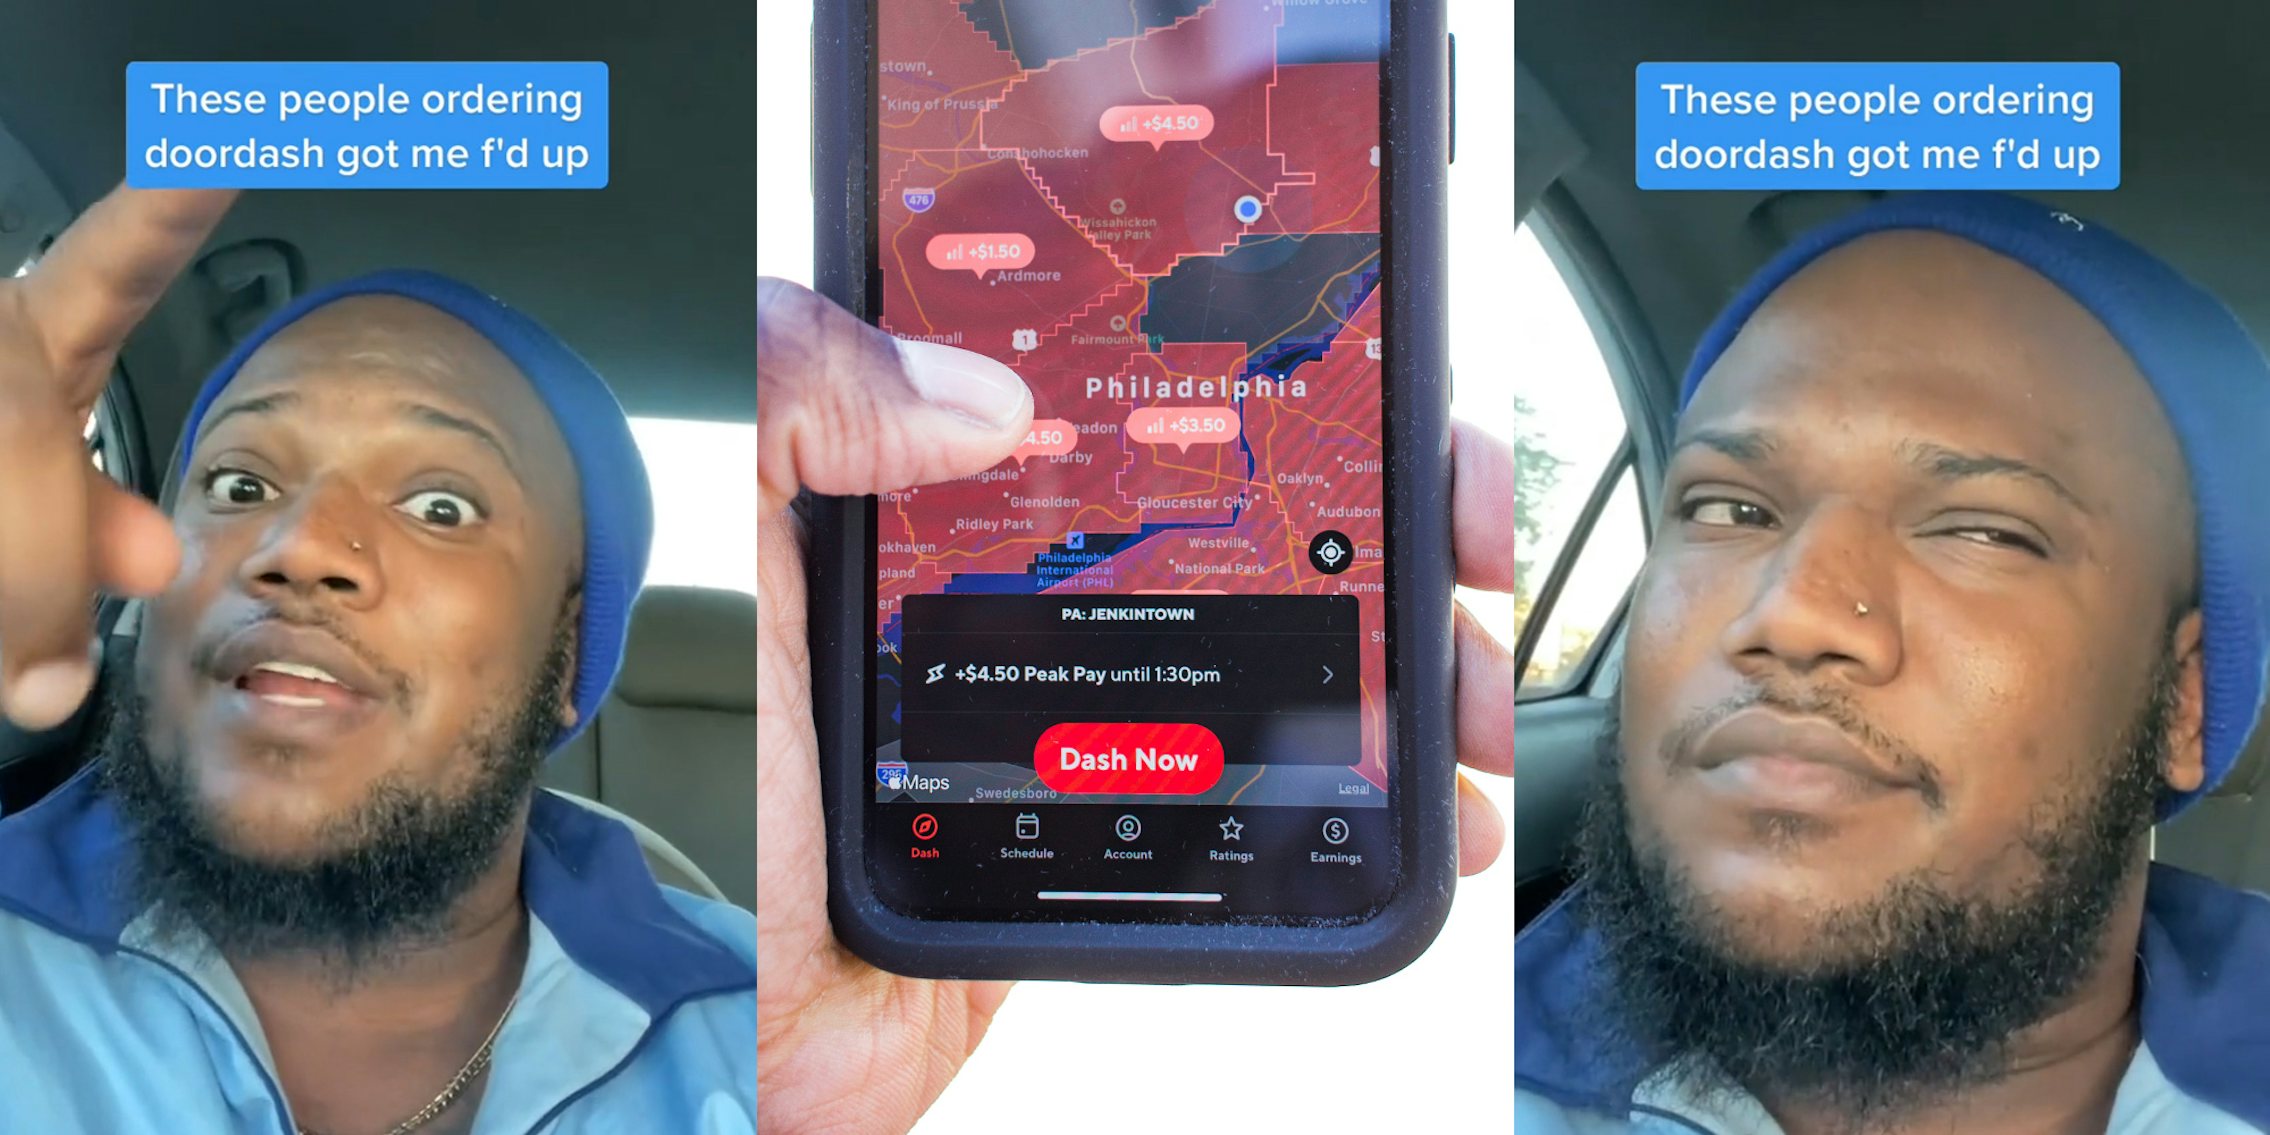 DoorDash employee speaking in car with caption 'These people ordering doordash got me f'd up' (l) hand holding phone with Dash Now option on DoorDash app in front of white background (c) DoorDash employee speaking in car with caption 'These people ordering doordash got me f'd up' (r)